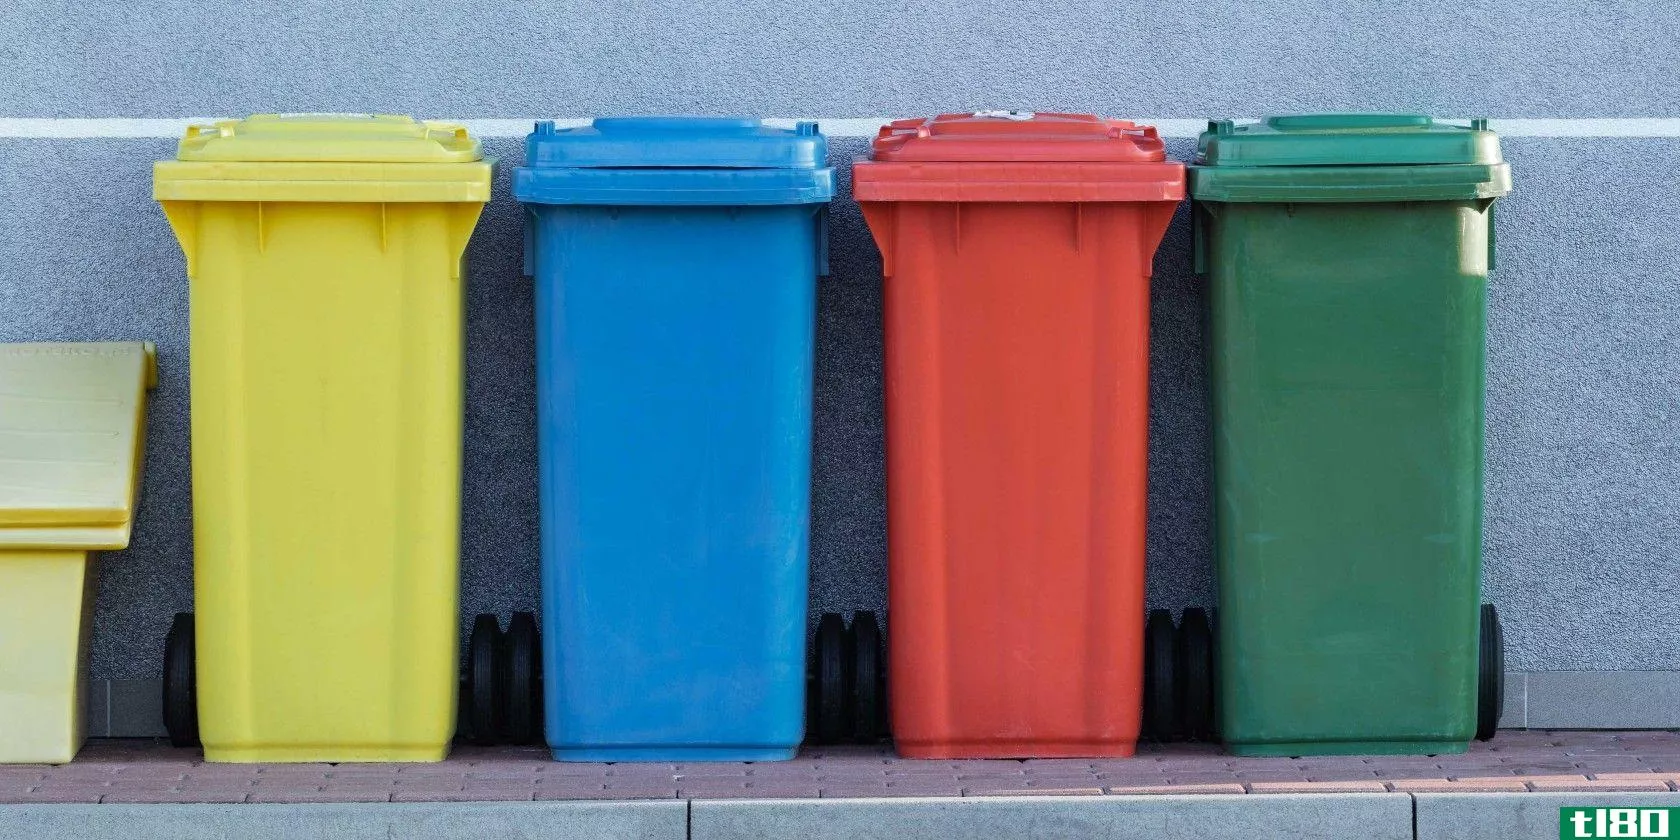 Eco-dustbins to reduce waste